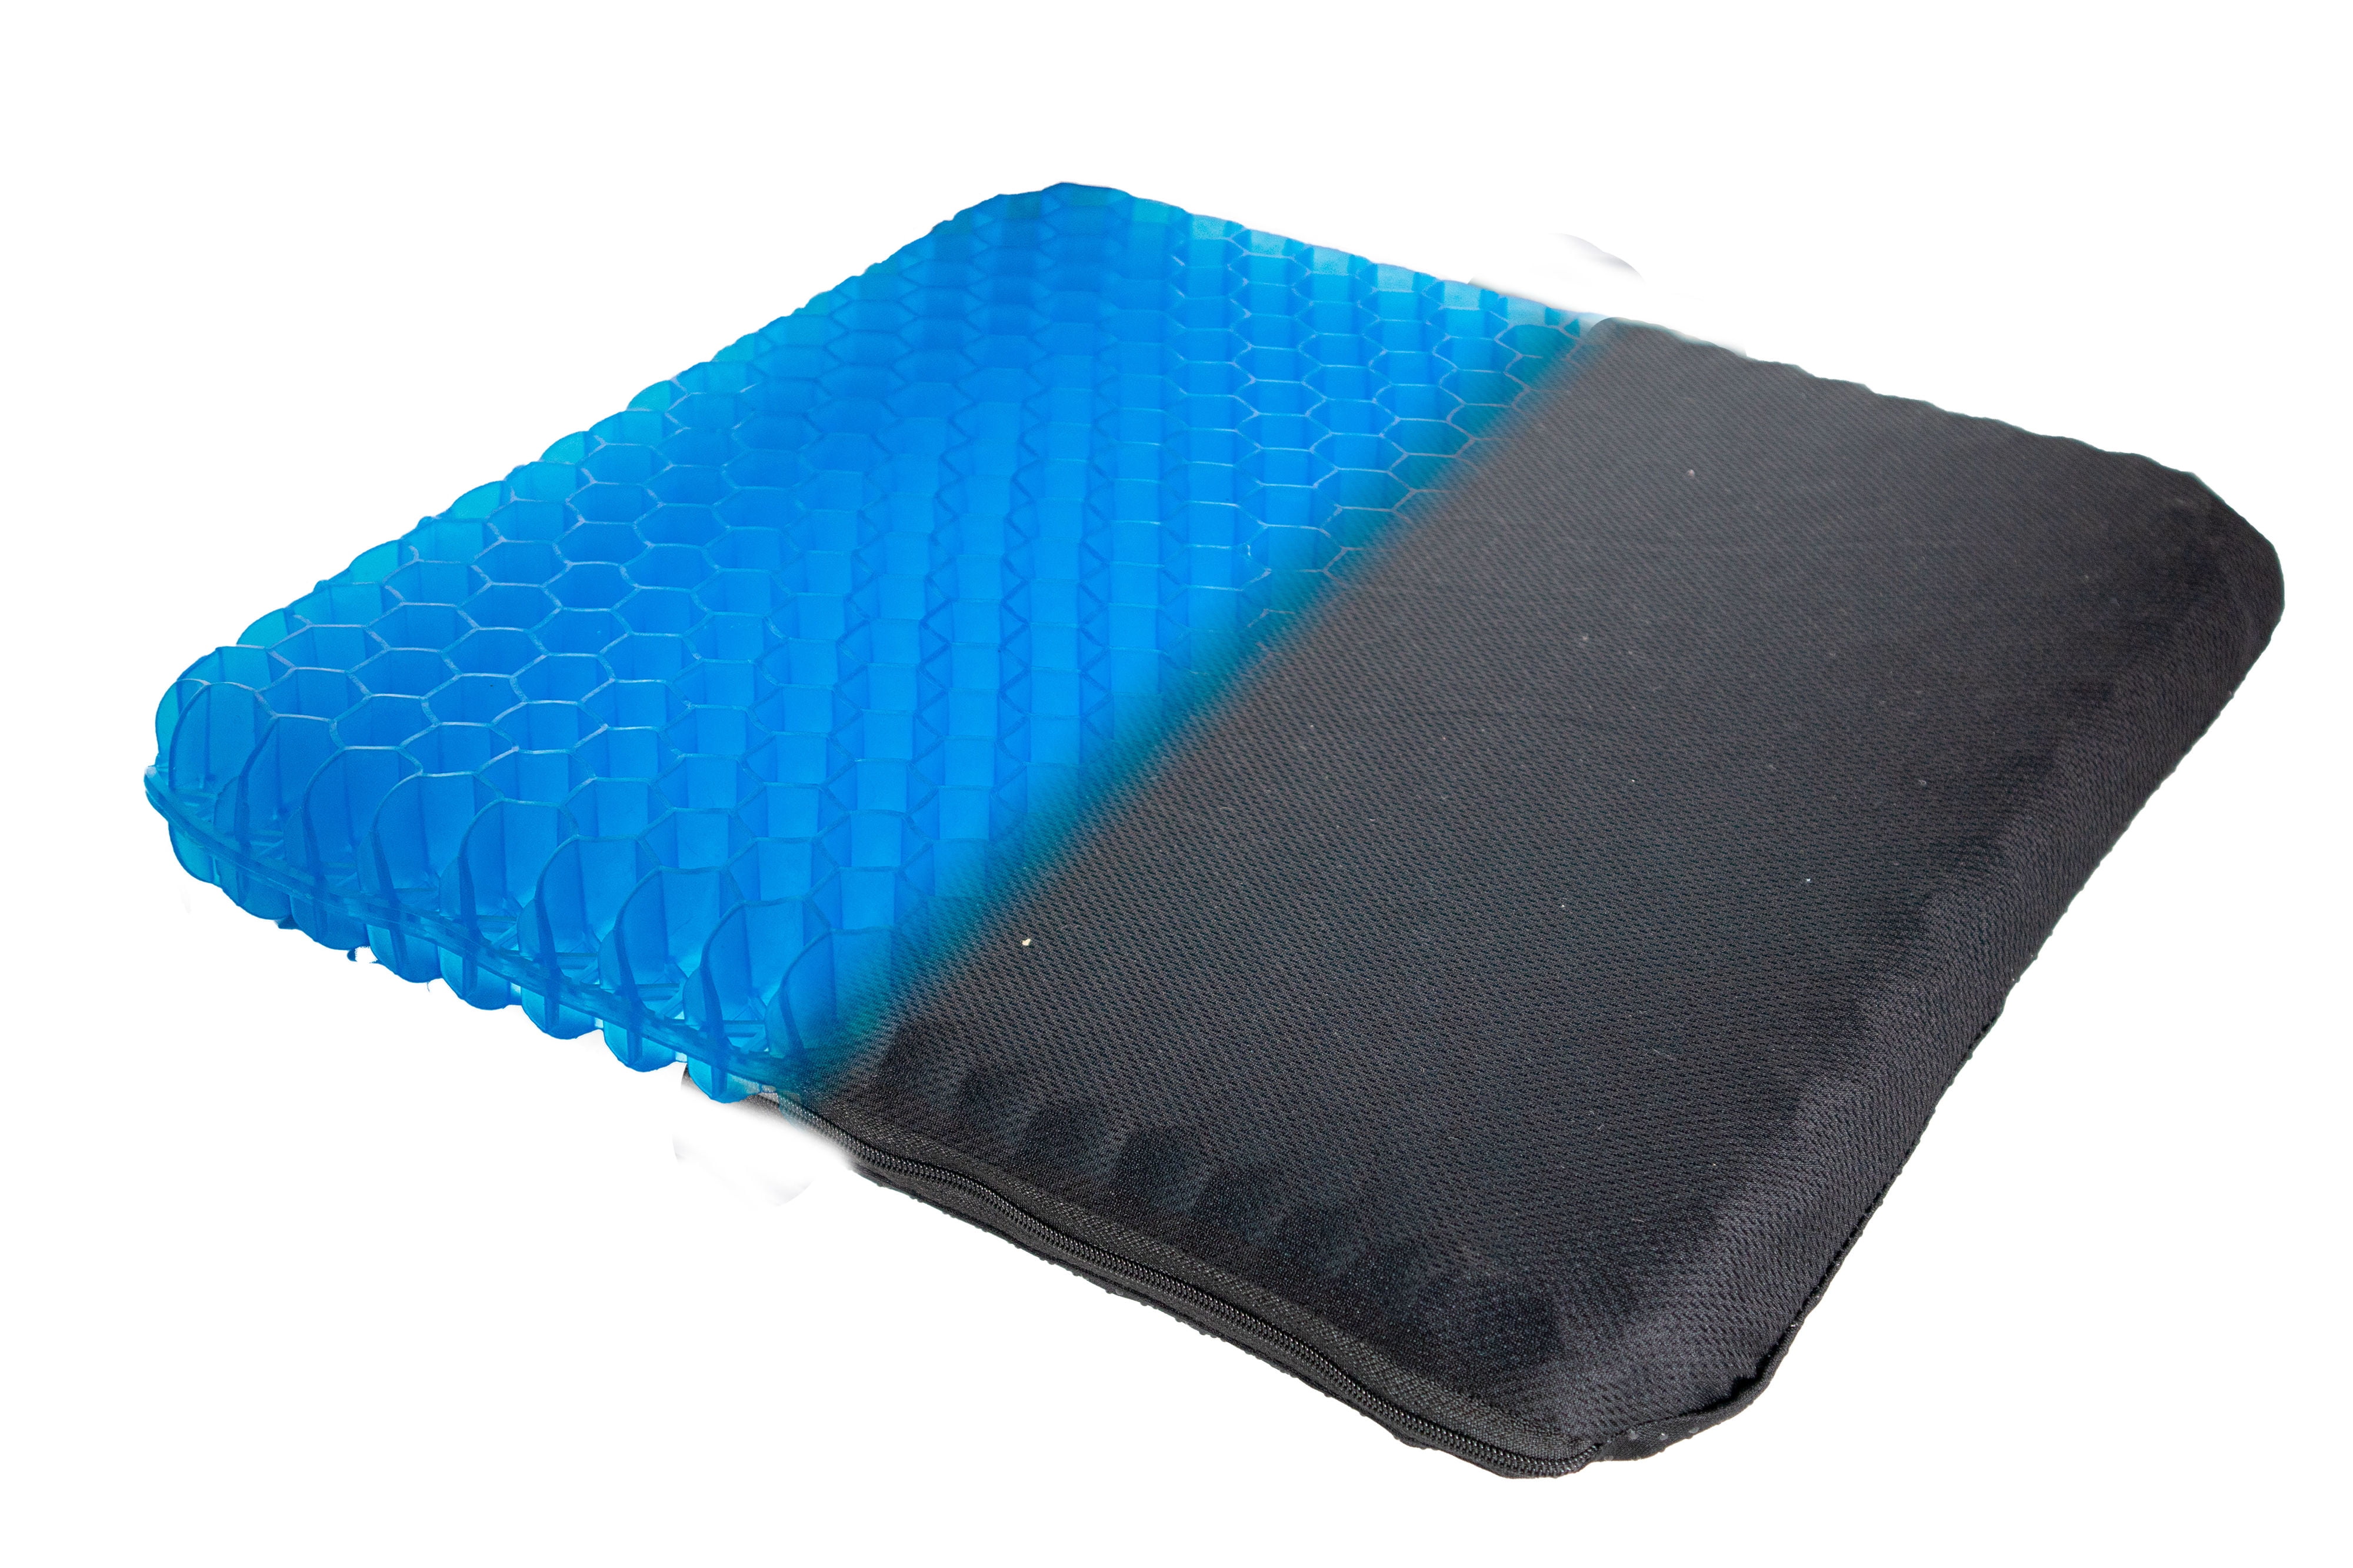 Yewrrite Gel Seat Cushion Relieving Pain Orthopedic Seat Cushion Gel Seat Cushions for Chairs/Car/Office Double Thick Breathable Honeycomb Egg Sitter Cushion Coccyx Cushion with Non-Slip Cover 